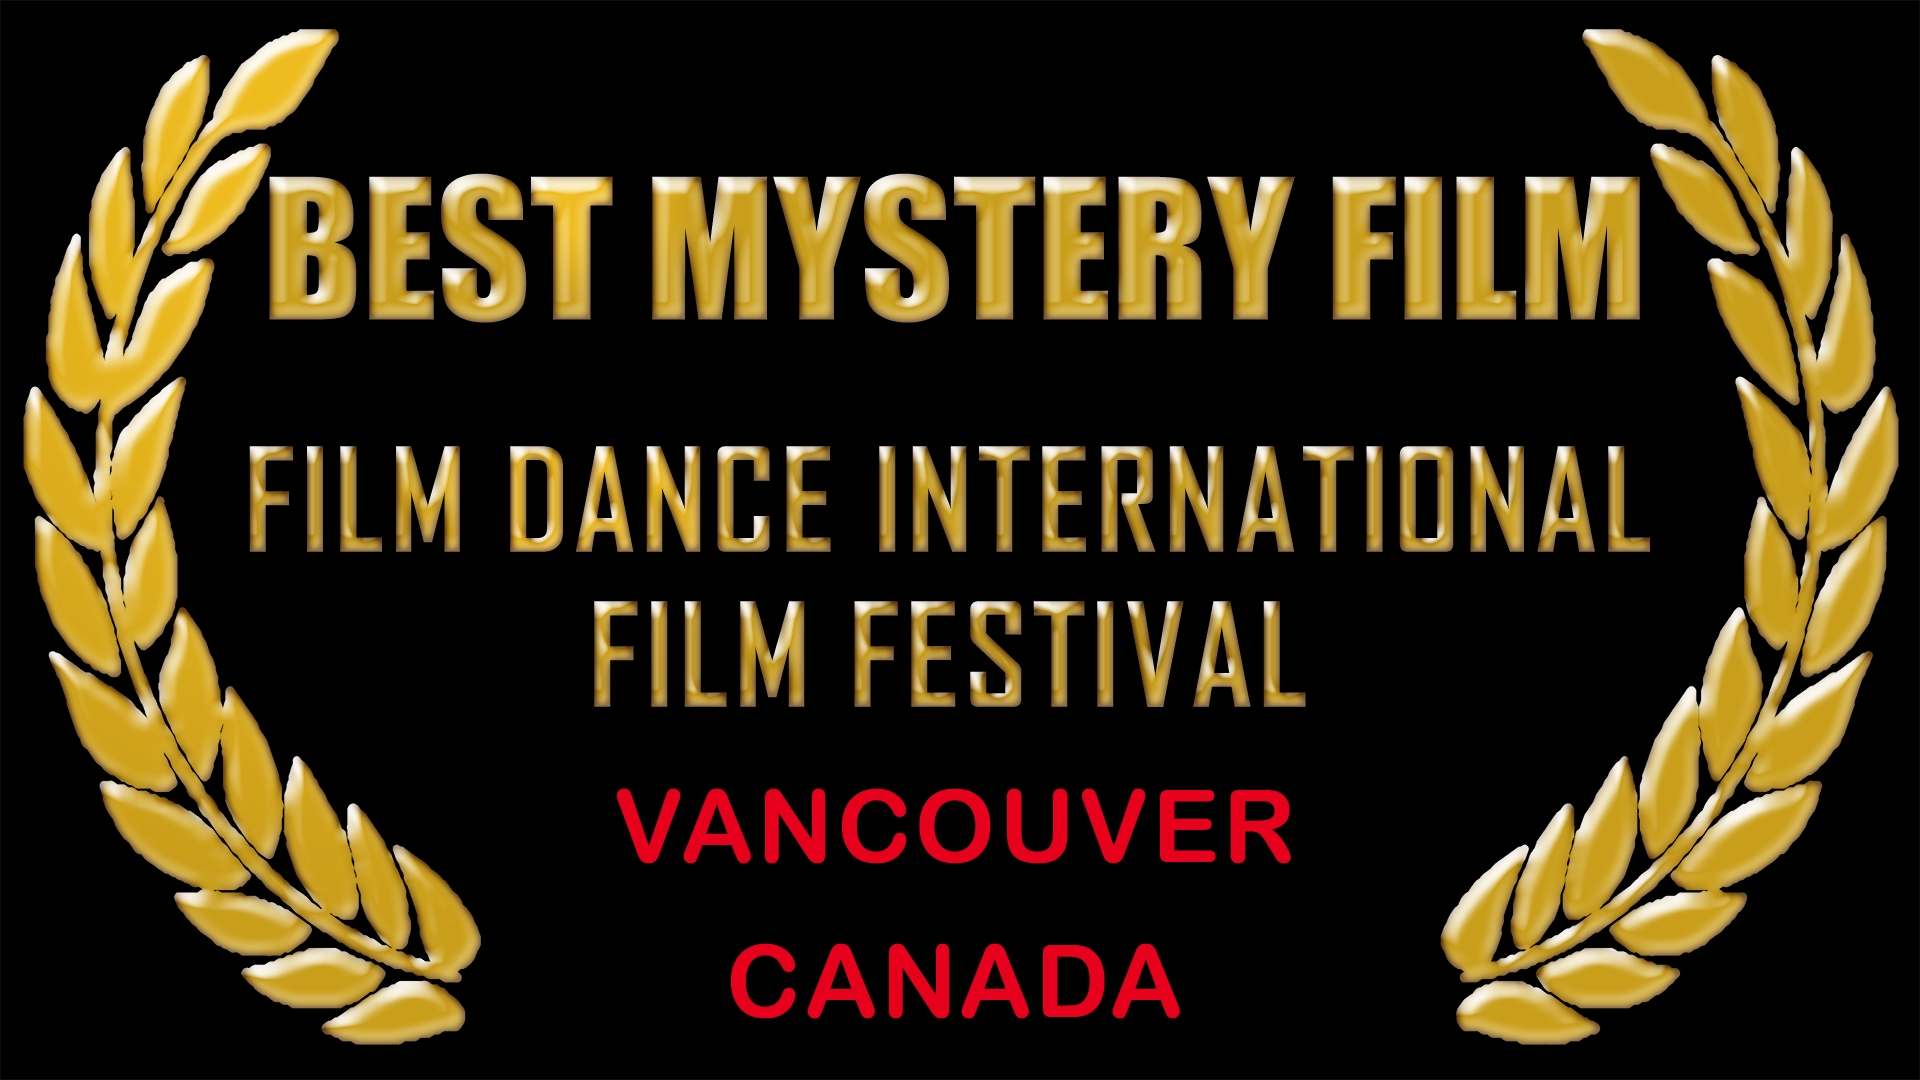 Best Mistery Film, Vancouver, Canada